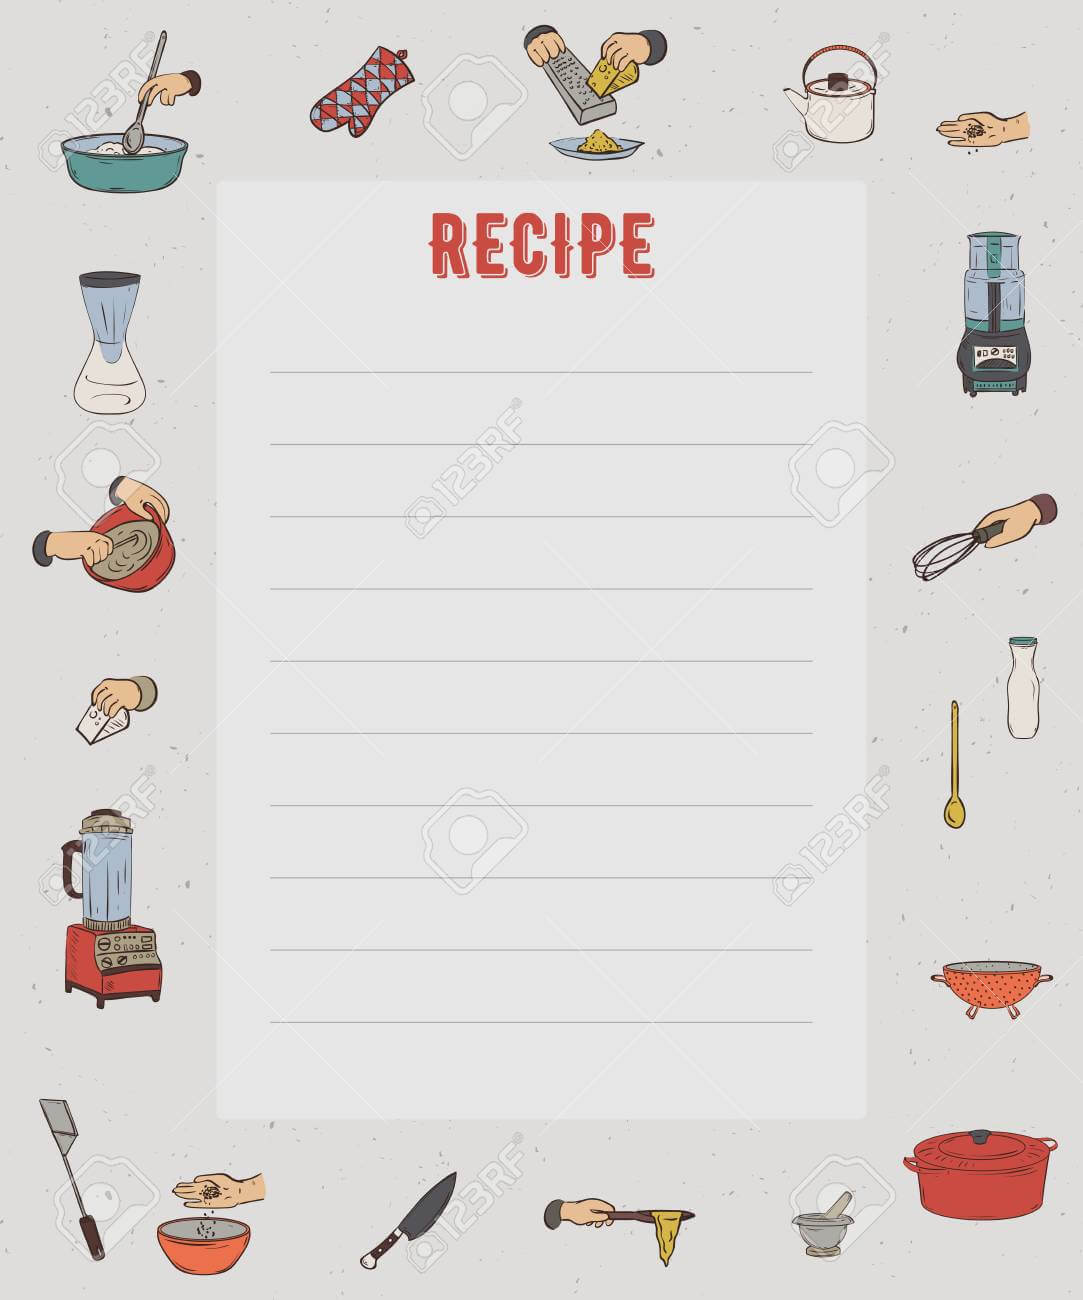 Recipe Card. Cookbook Page. Design Template With Kitchen Utensils.. Throughout Recipe Card Design Template